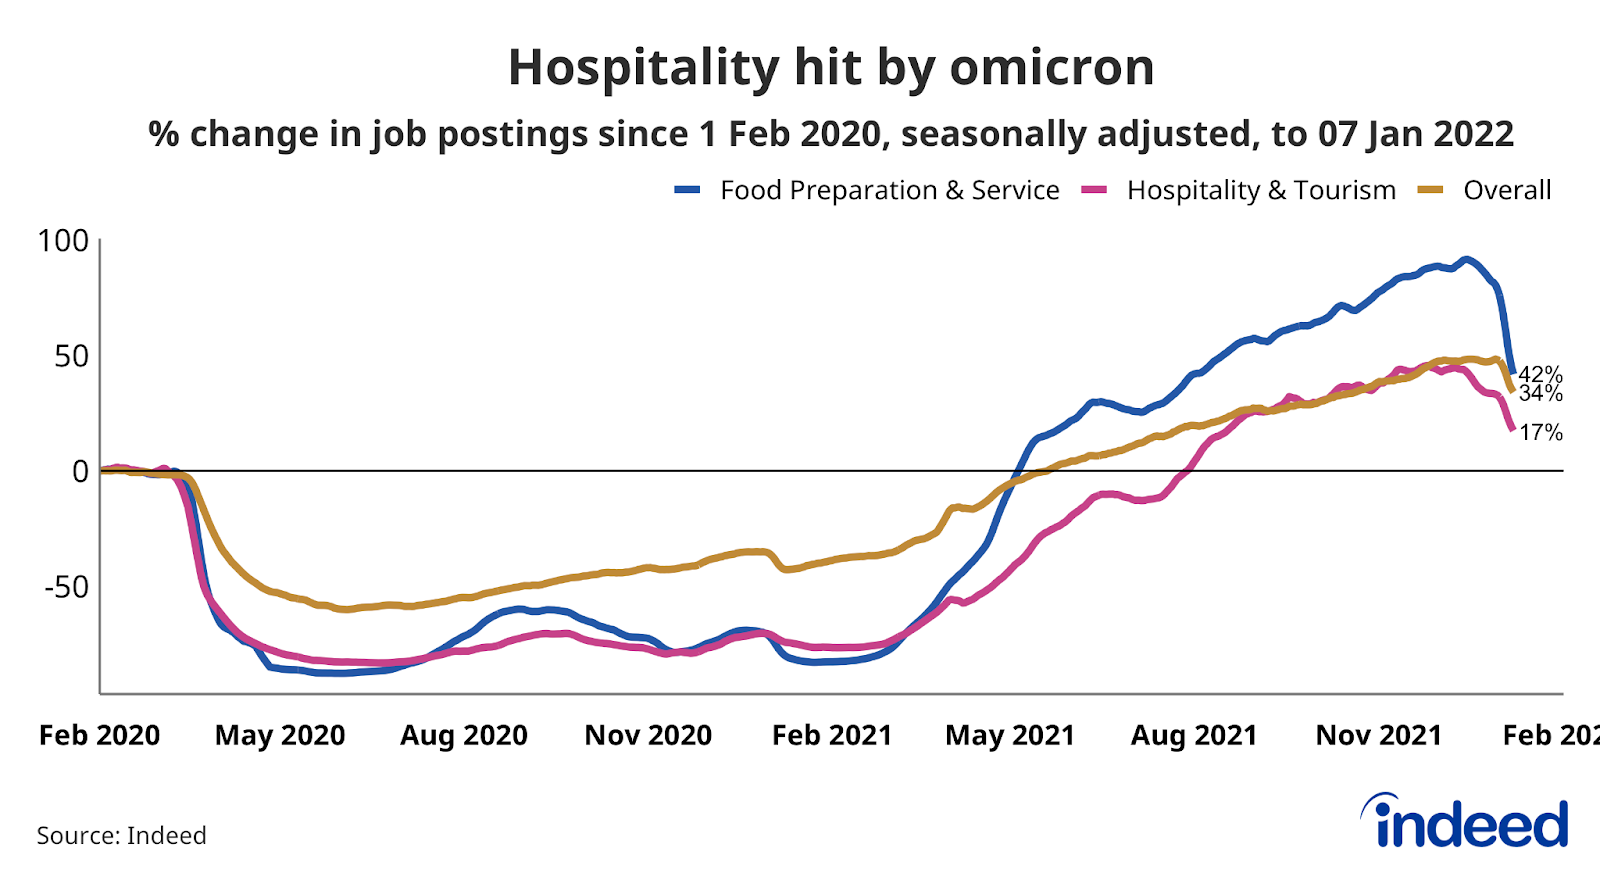 A line graph titled “Hospitality hit by omicron” 